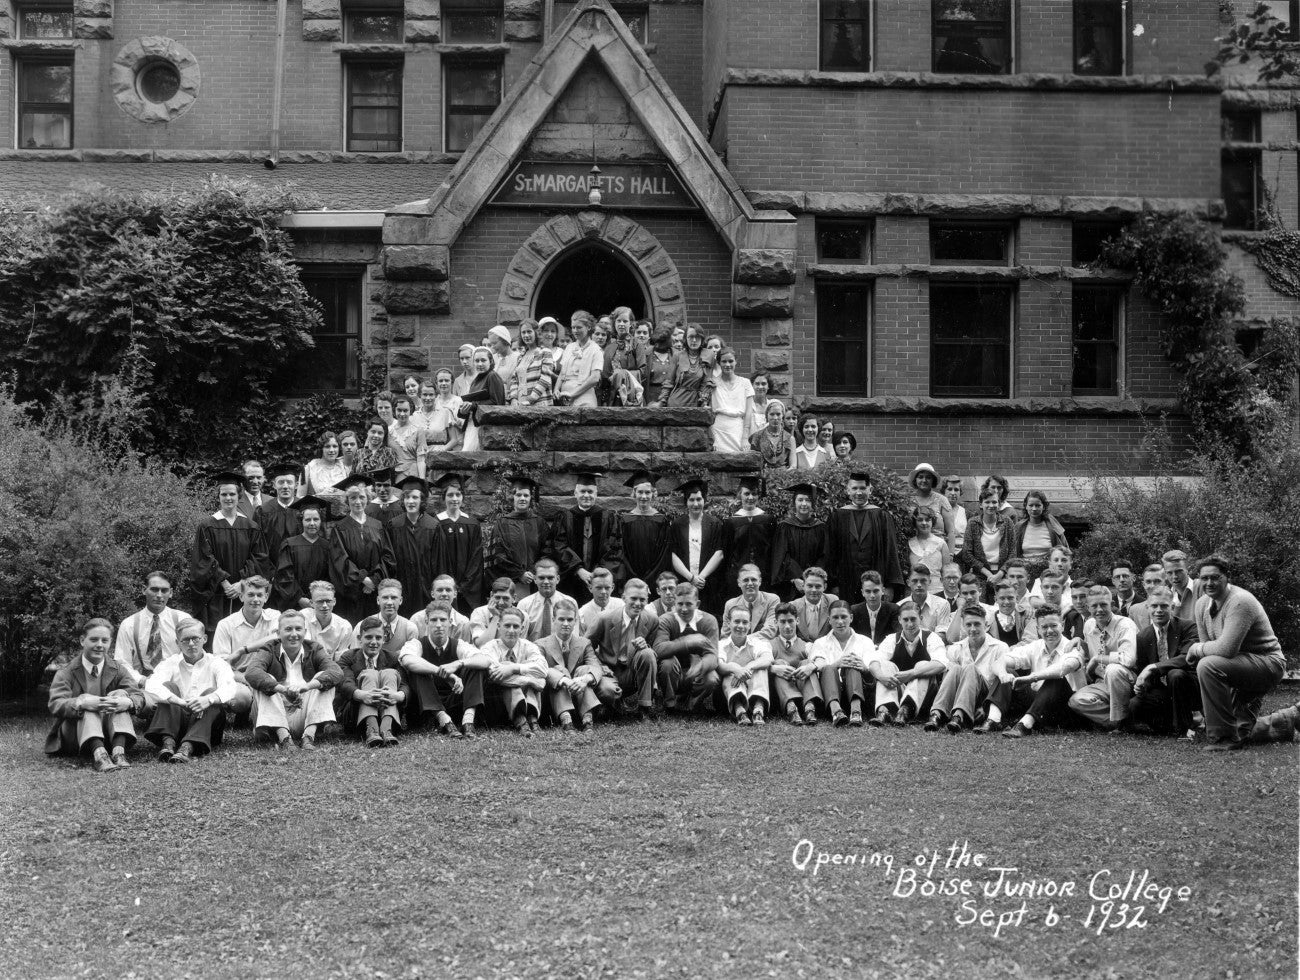 Students in front of St. Margaret's Hall